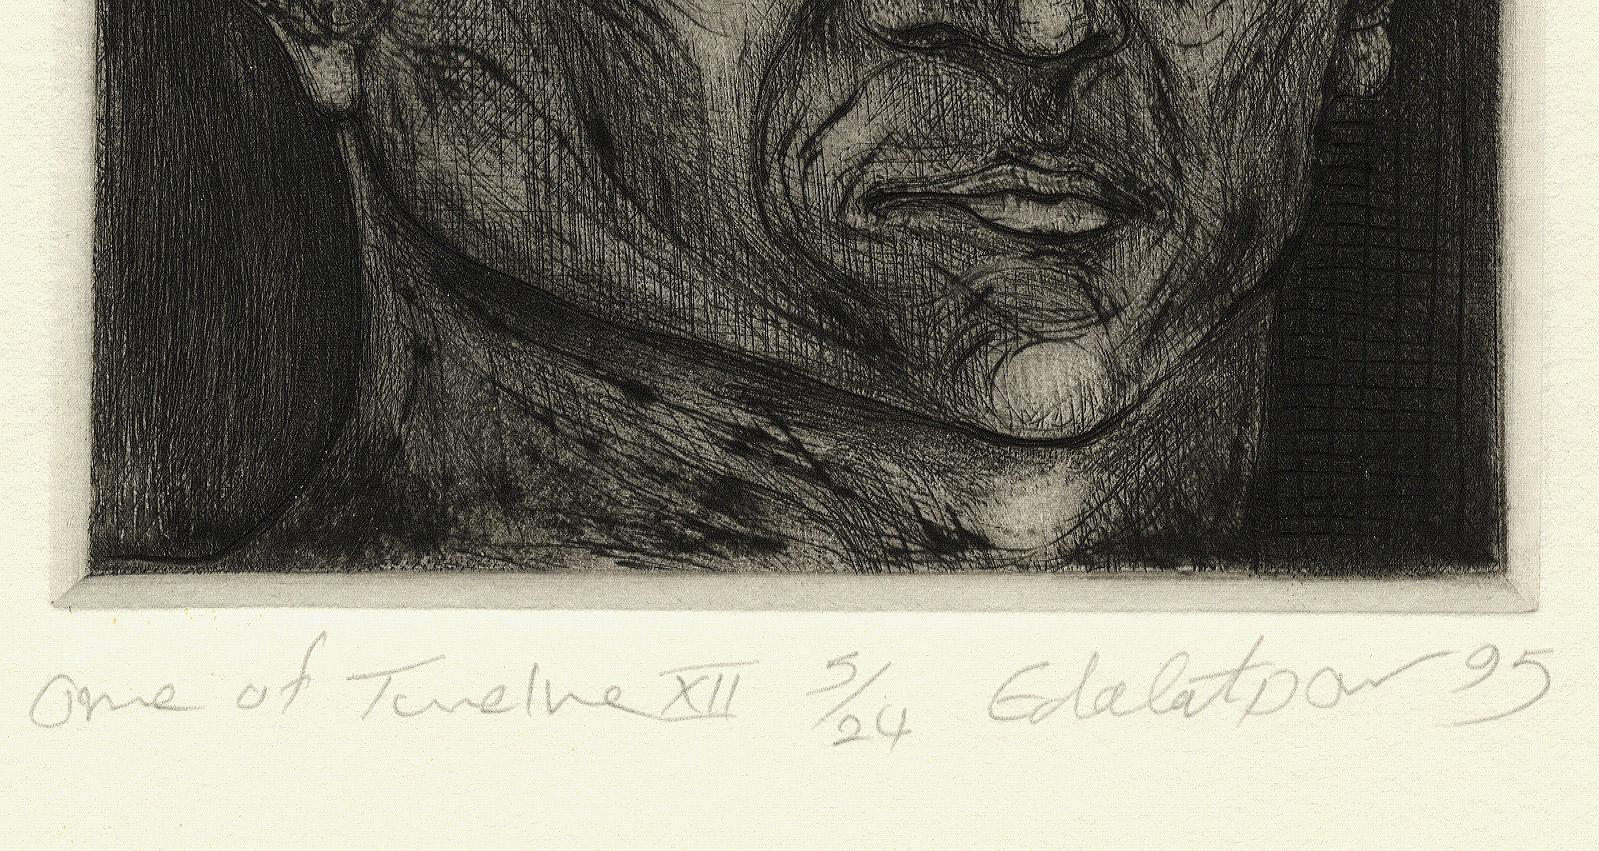 One of Twelve XII (etchings of one of 12 heads based on  monumental sculpture) - Print by Seyed M. S. Edalatpour